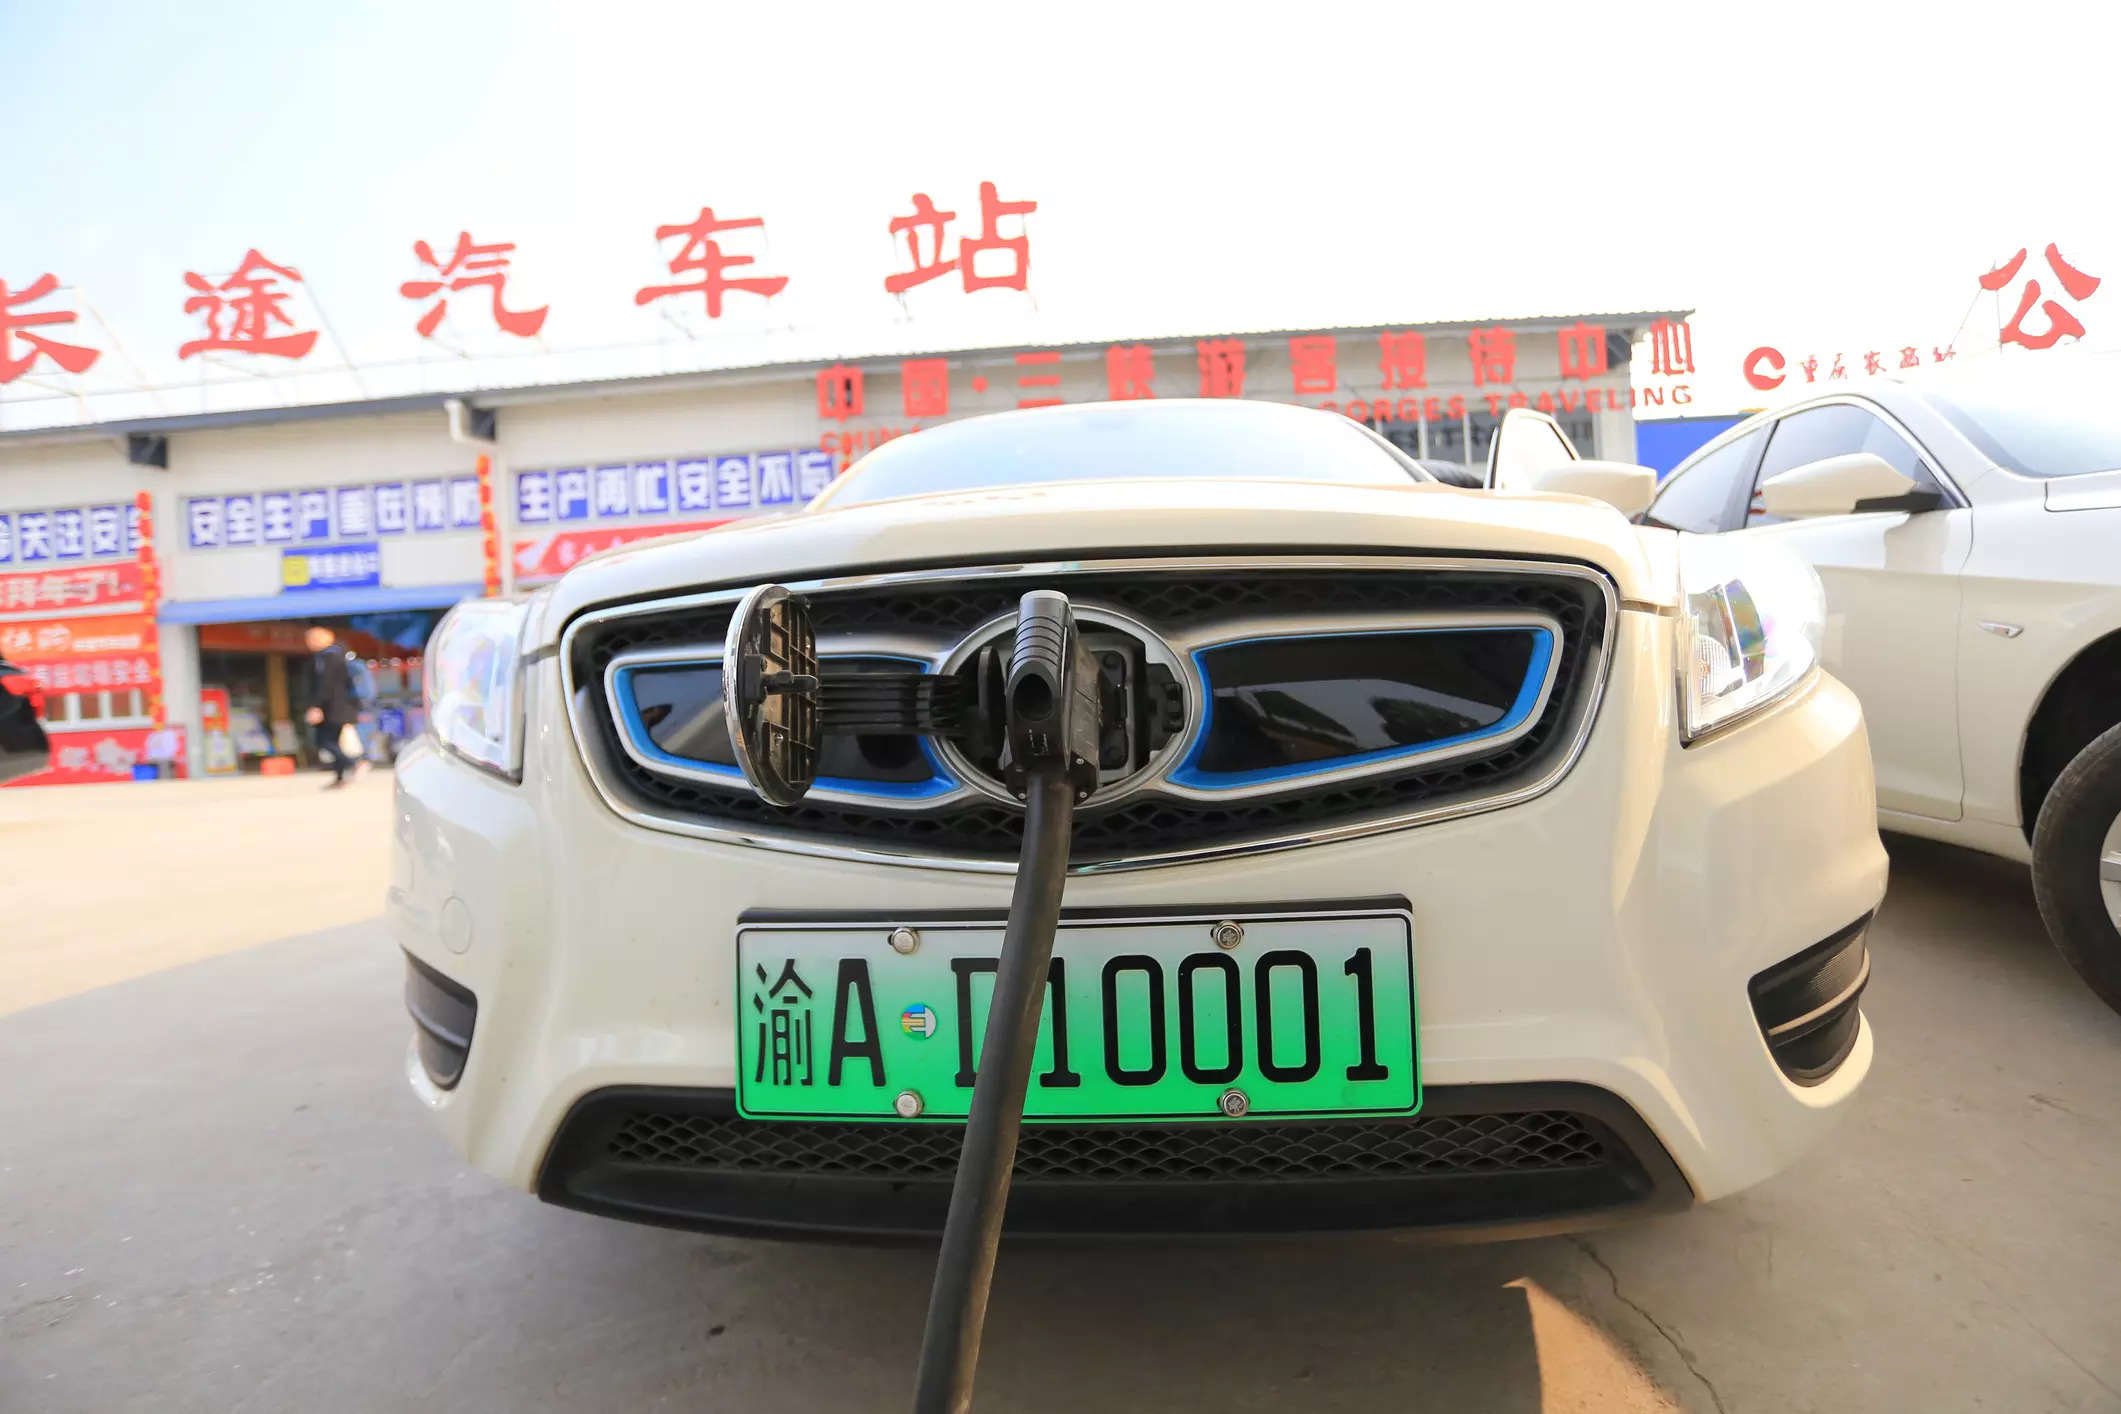 EU tariffs hit growth in China's electric car exports, industry body official says 